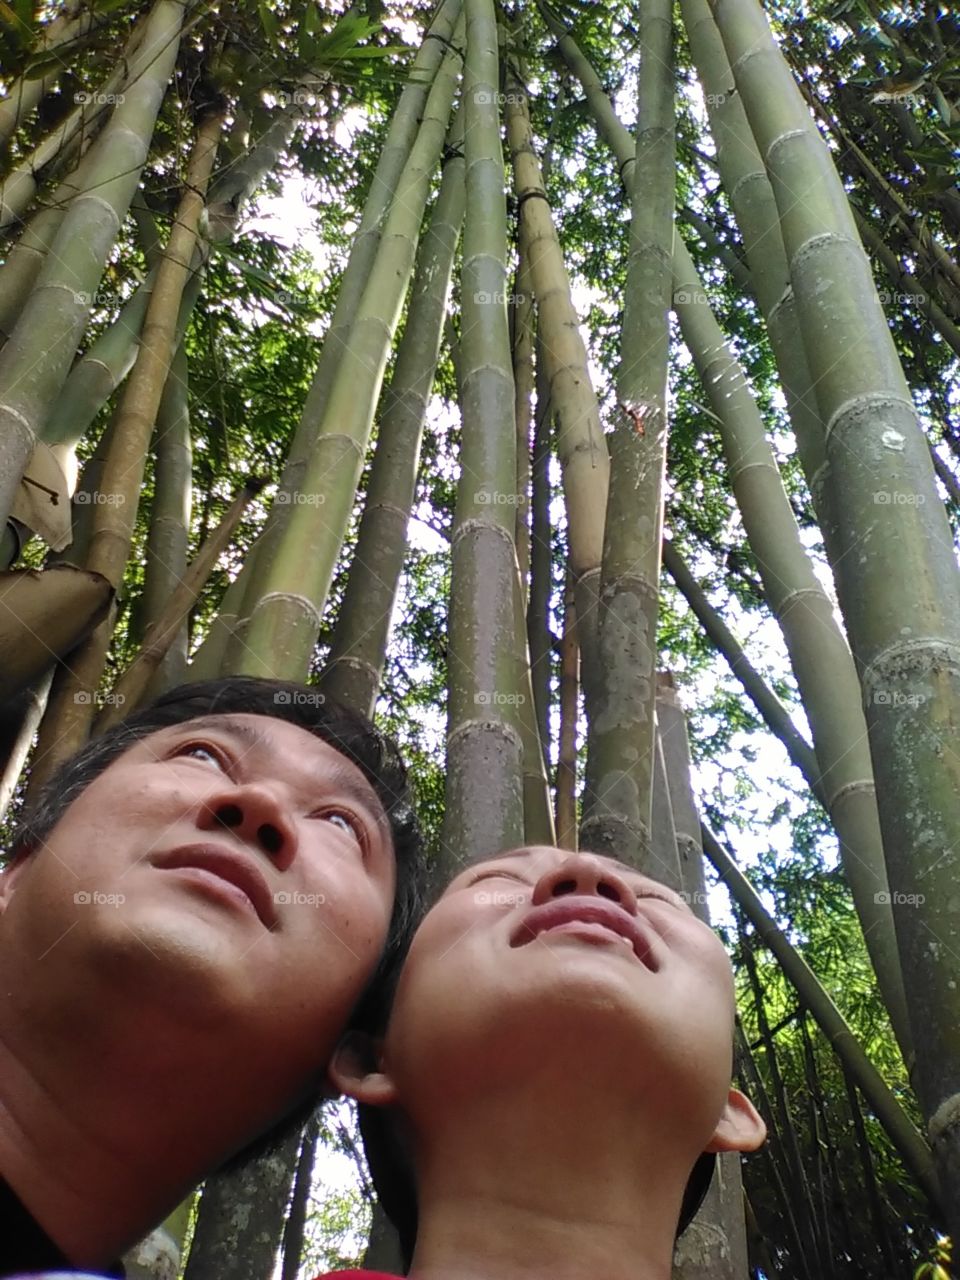 husband and wife in the middle of bamboo forest... hmm...